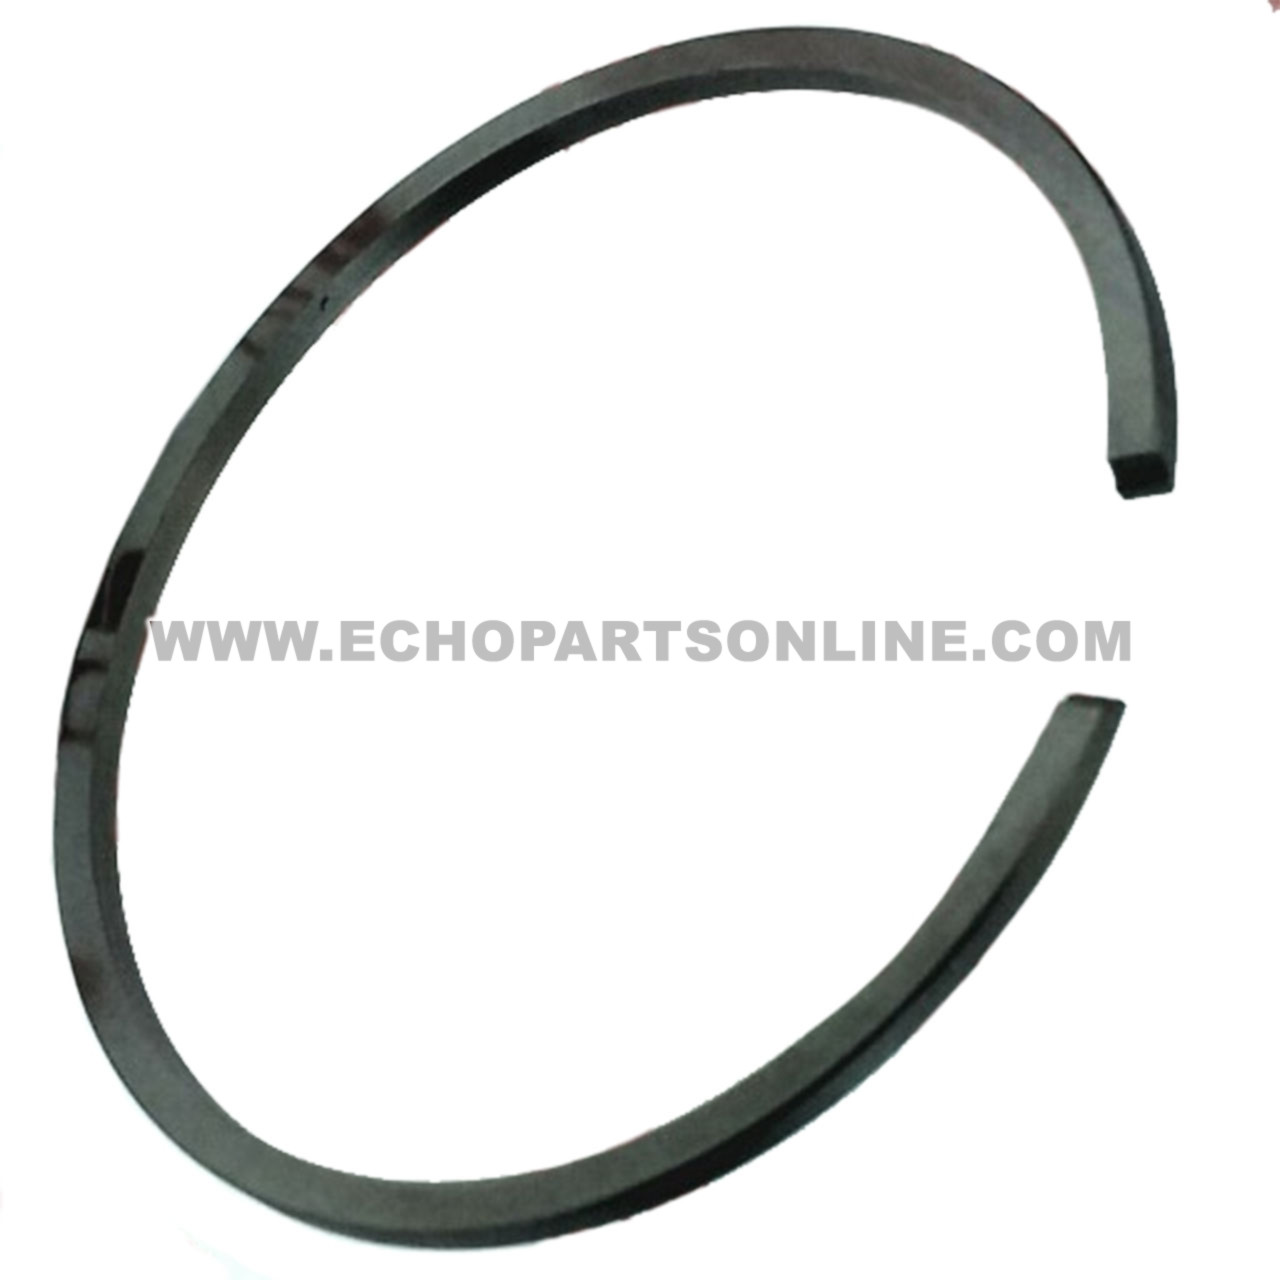 ECHO 10001105330 - RING PISTON **SUPERSEDED TO A101000850 